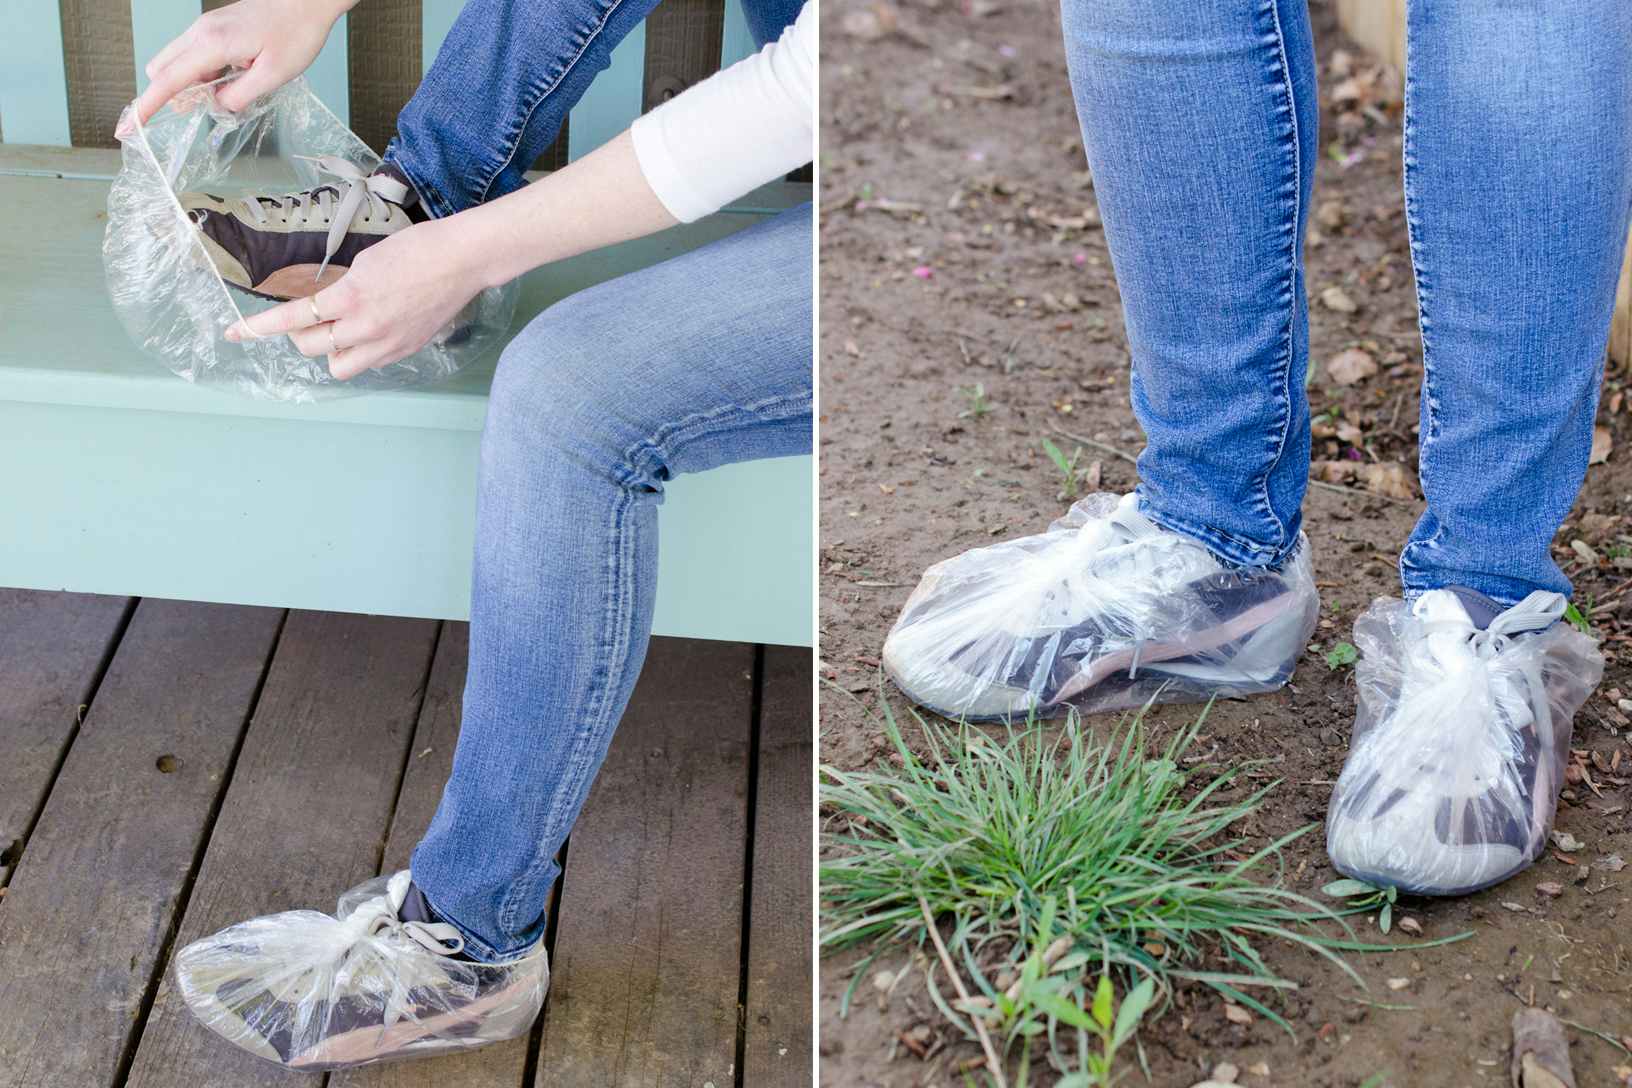 A person putting shower caps over their running shoes to protect them from mud.